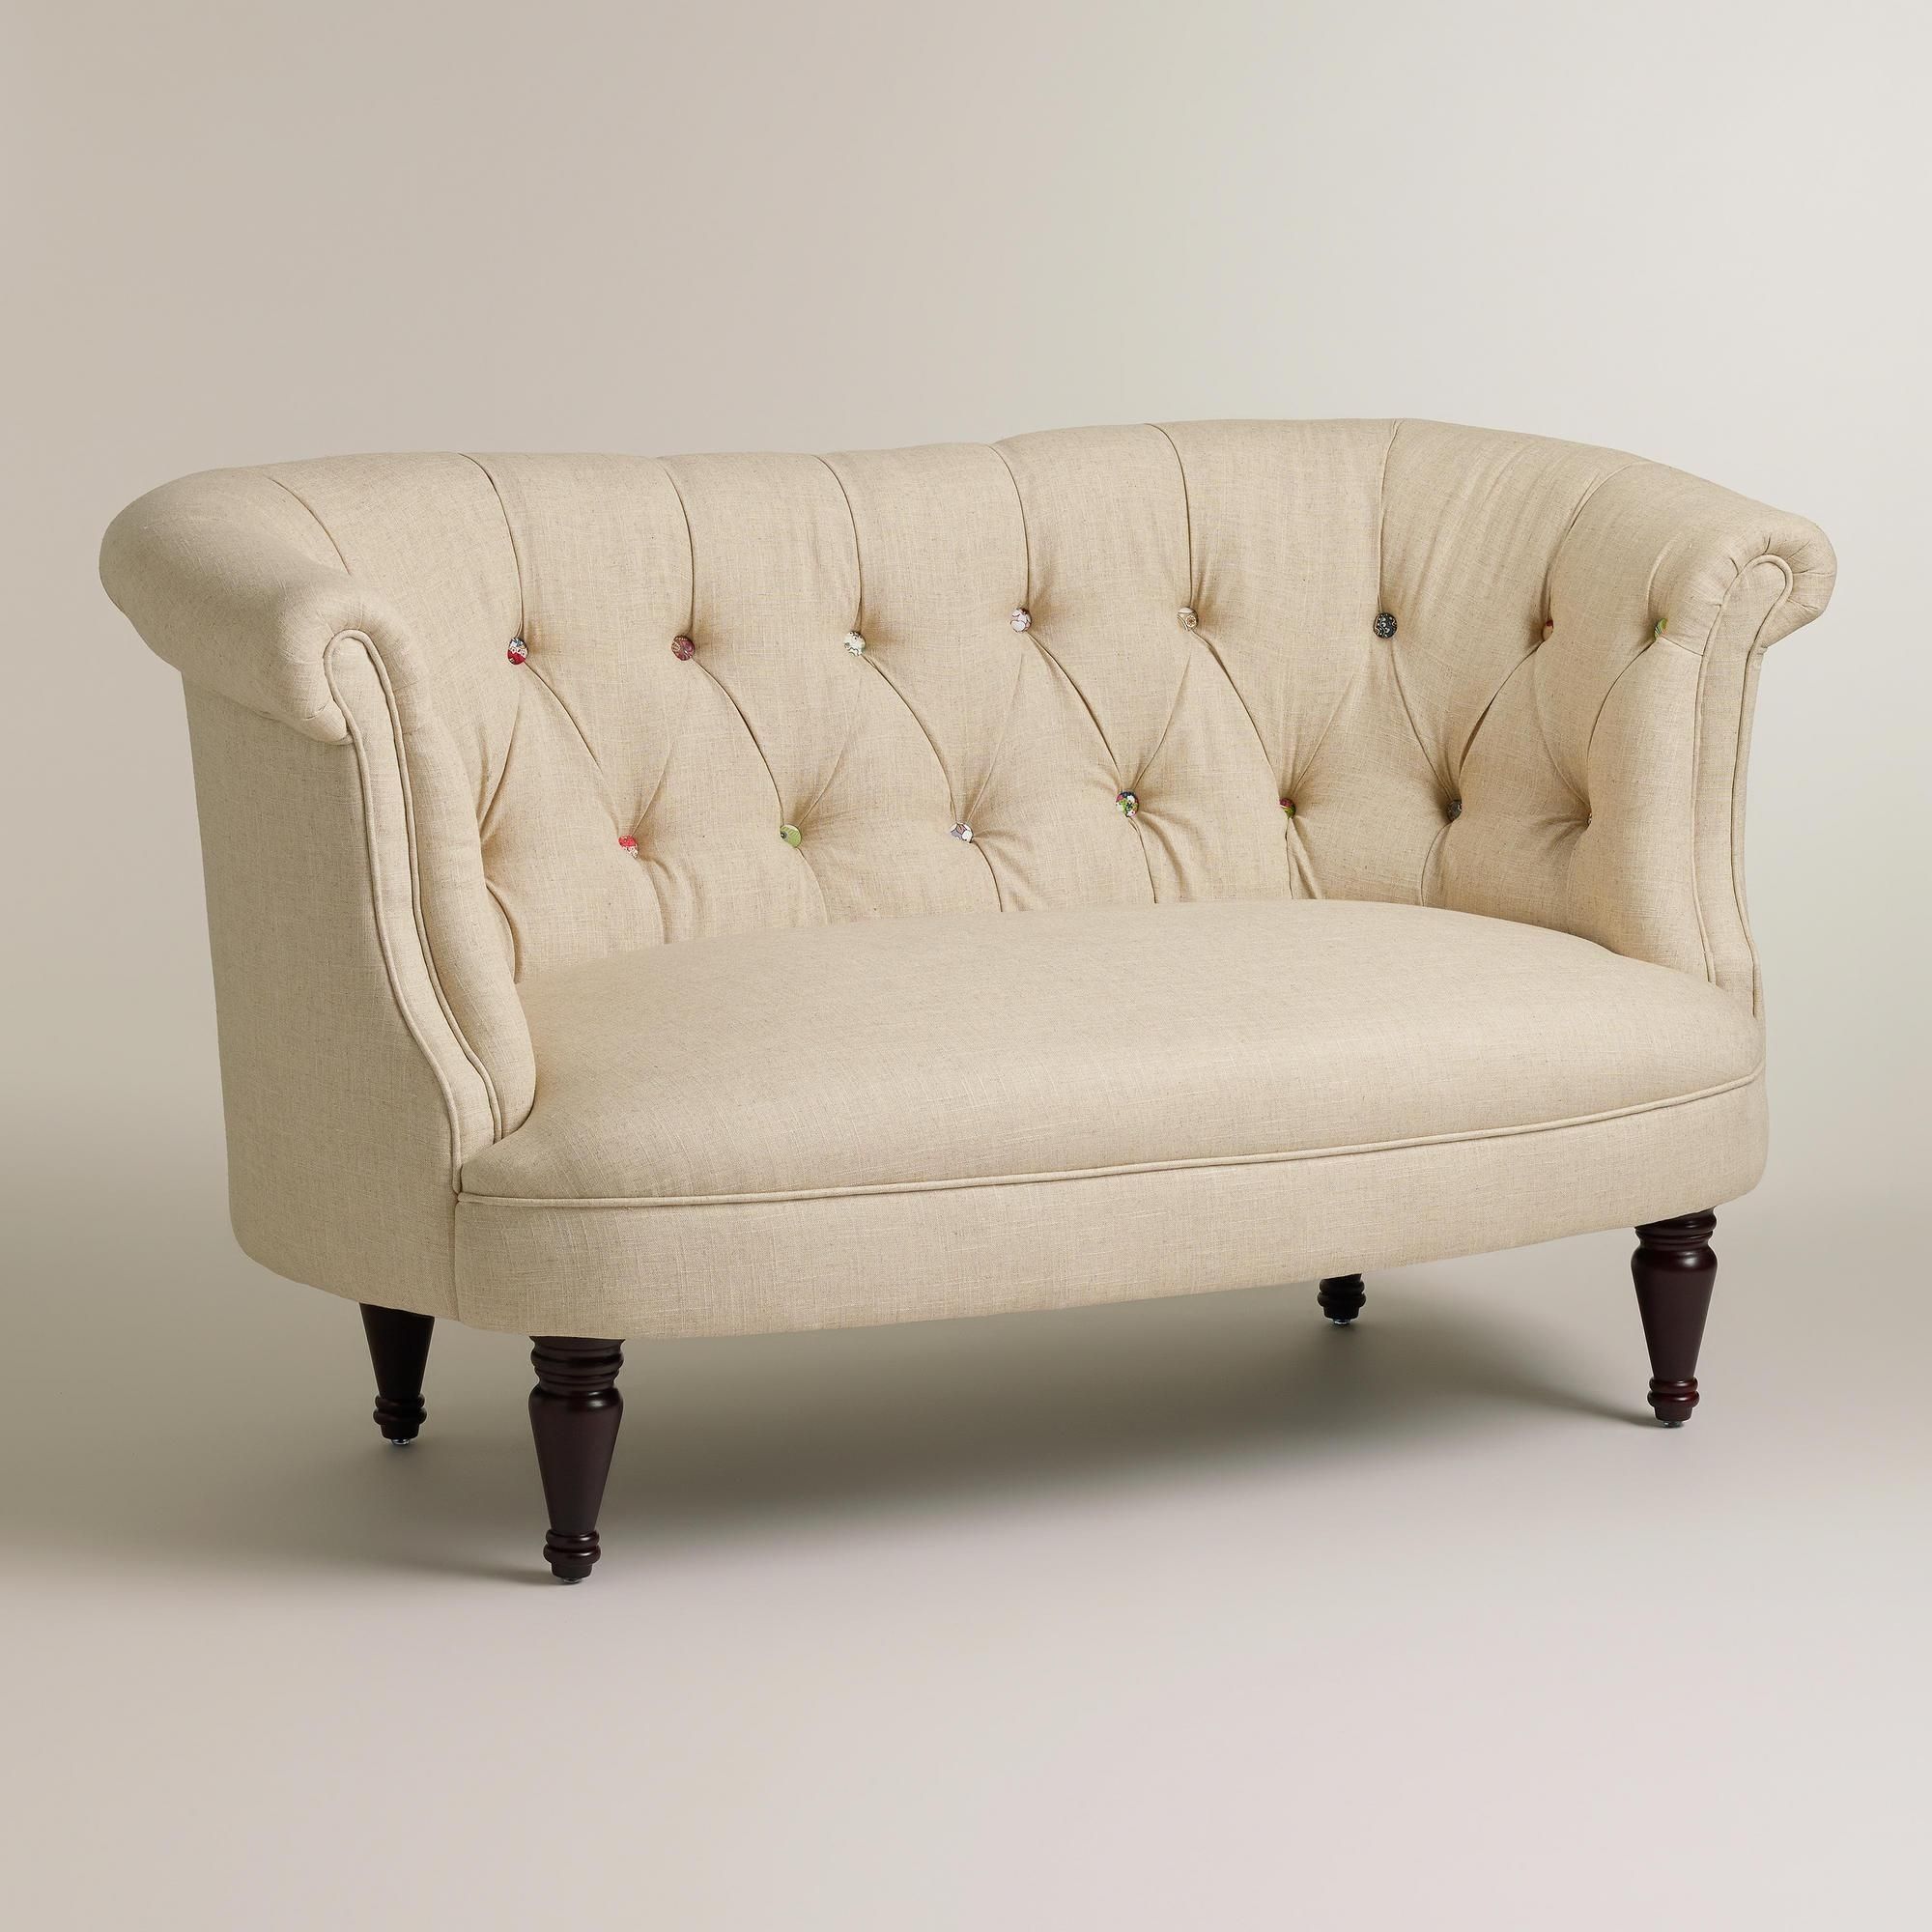 Trend Mini Sofa For Bedroom 15 About Remodel Sofas And Couches Ideas Within Mini Sofas (Photo 1 of 10)